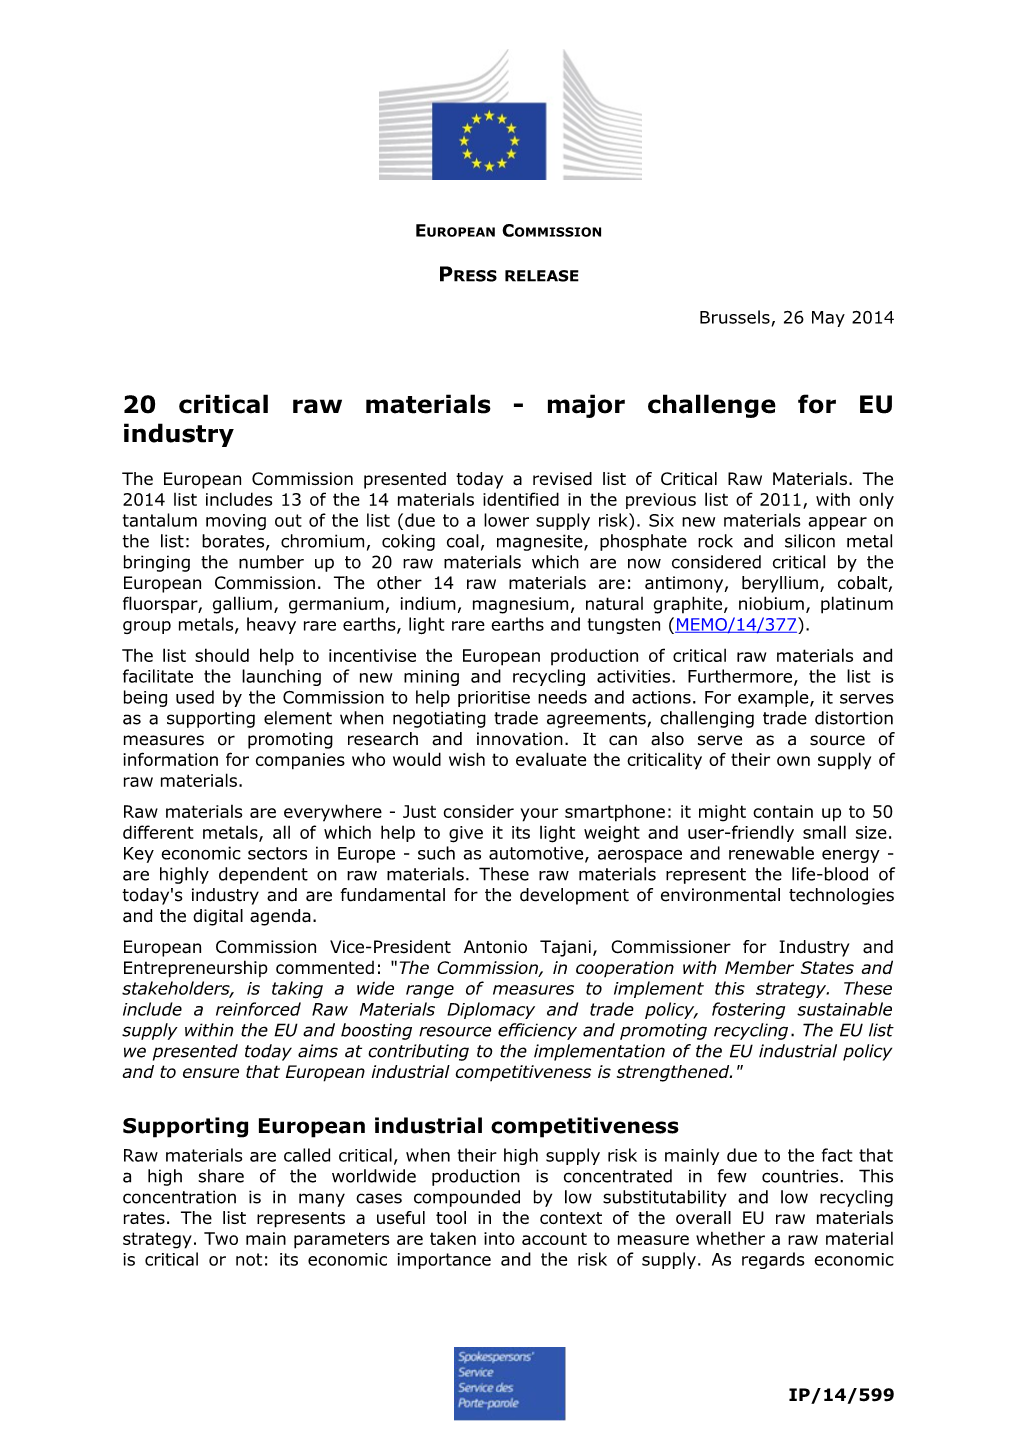 20 Critical Raw Materials - Major Challenge for EU Industry